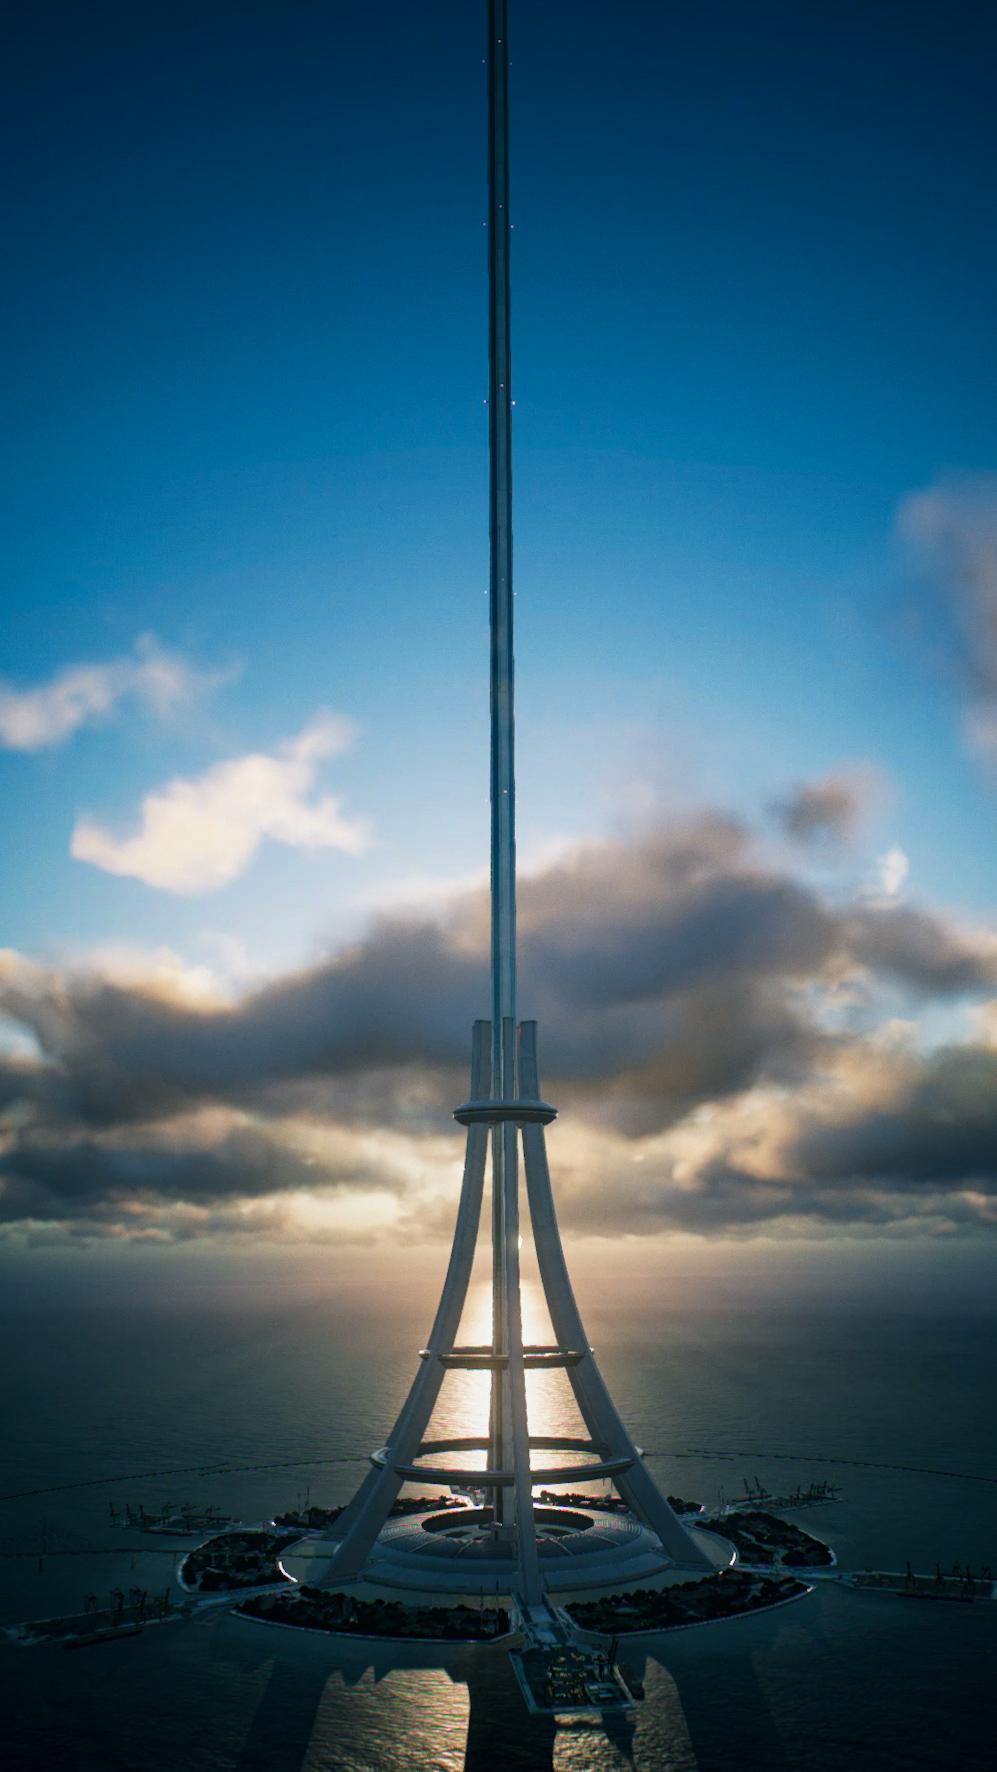 Couldn't find any vertical wallpaper for the Space Elevator, so I screenshotted this for myself! Thought some of you guys might like it ^^